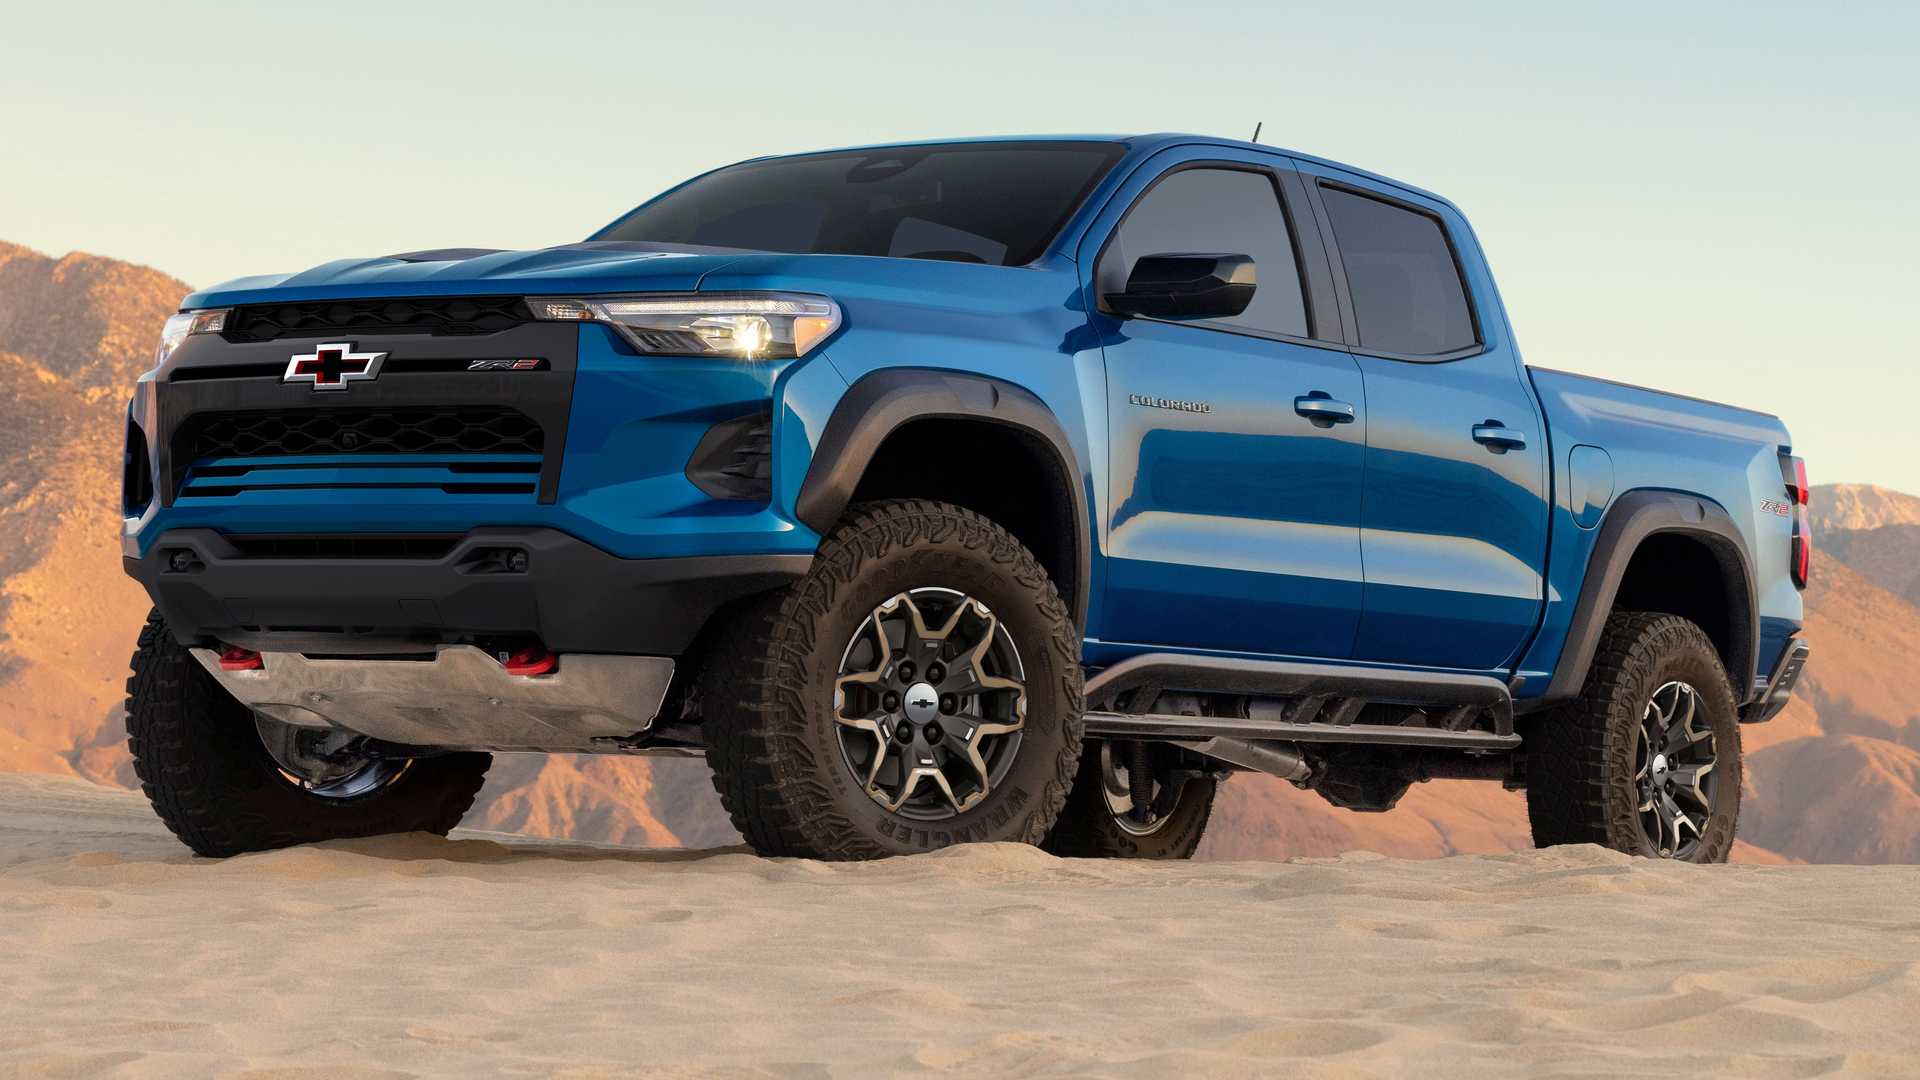 Chevrolet Colorado: From City Streets to Off-Road Ventures